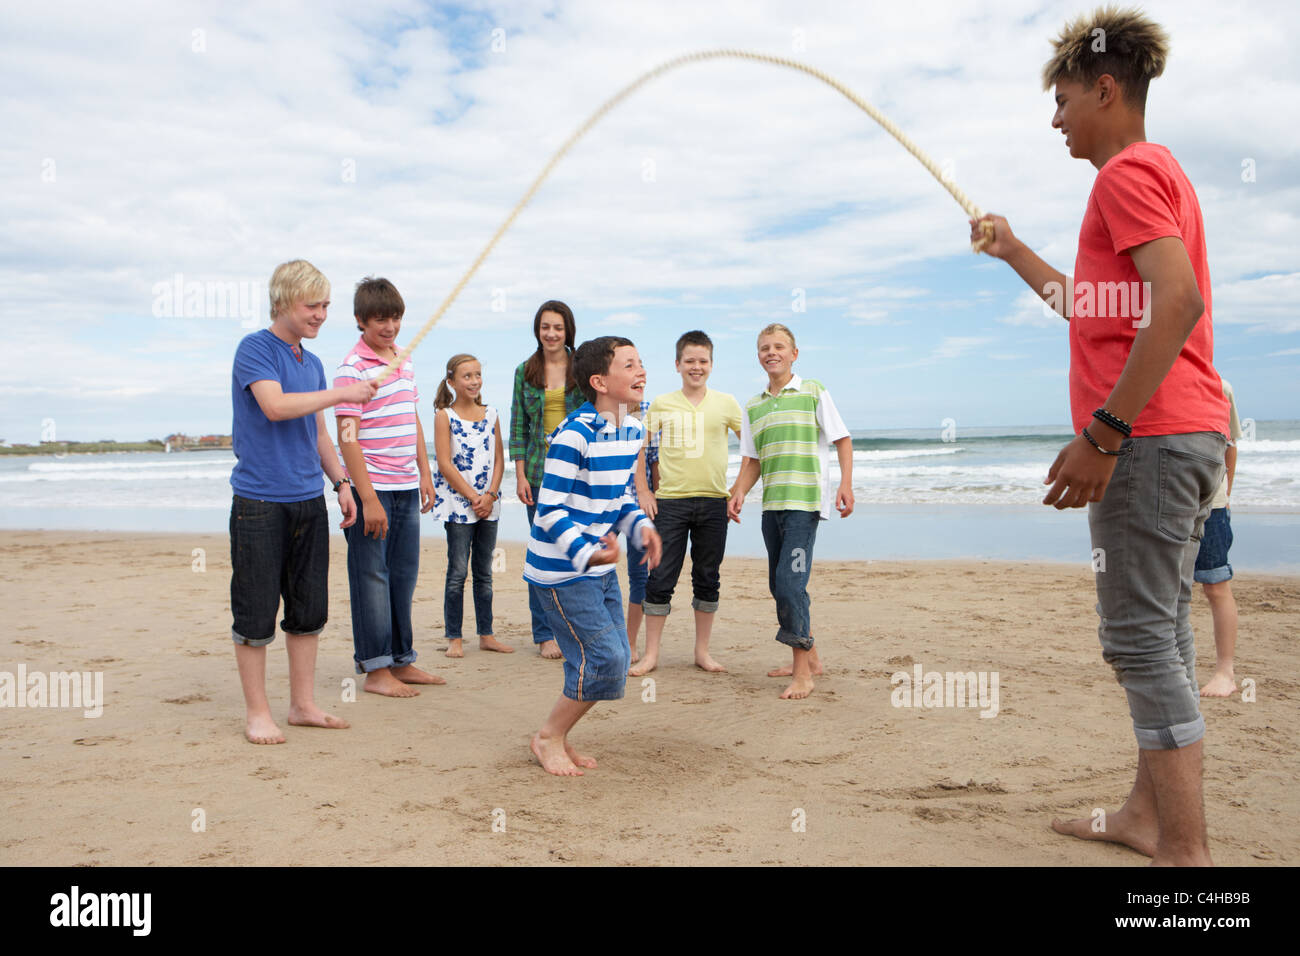 Teenagers playing skipping rope Stock Photo